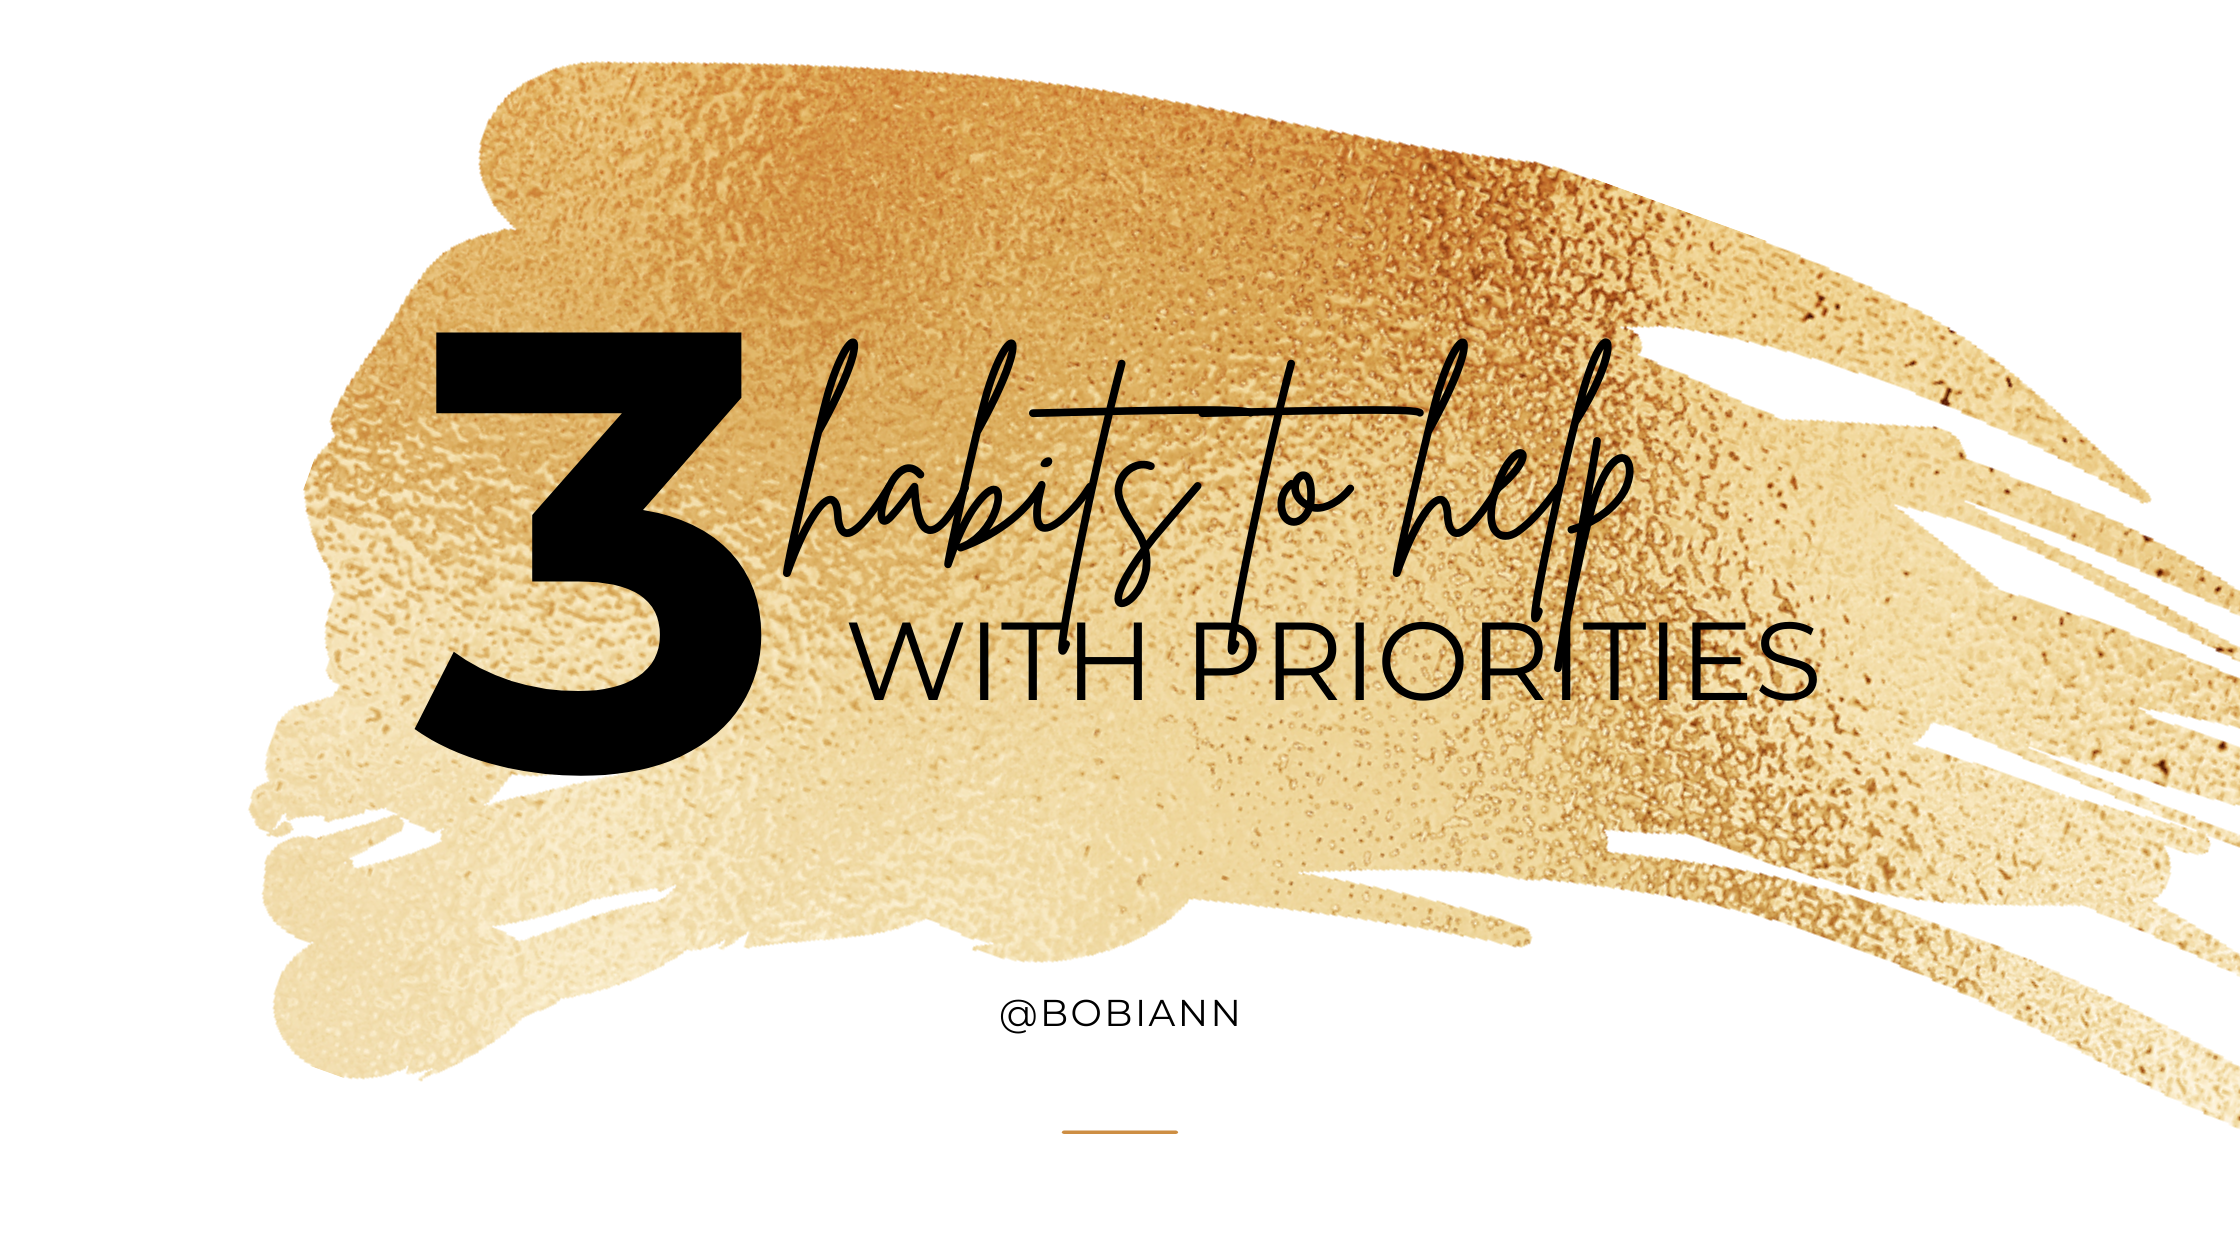 3 habits to help with priorities